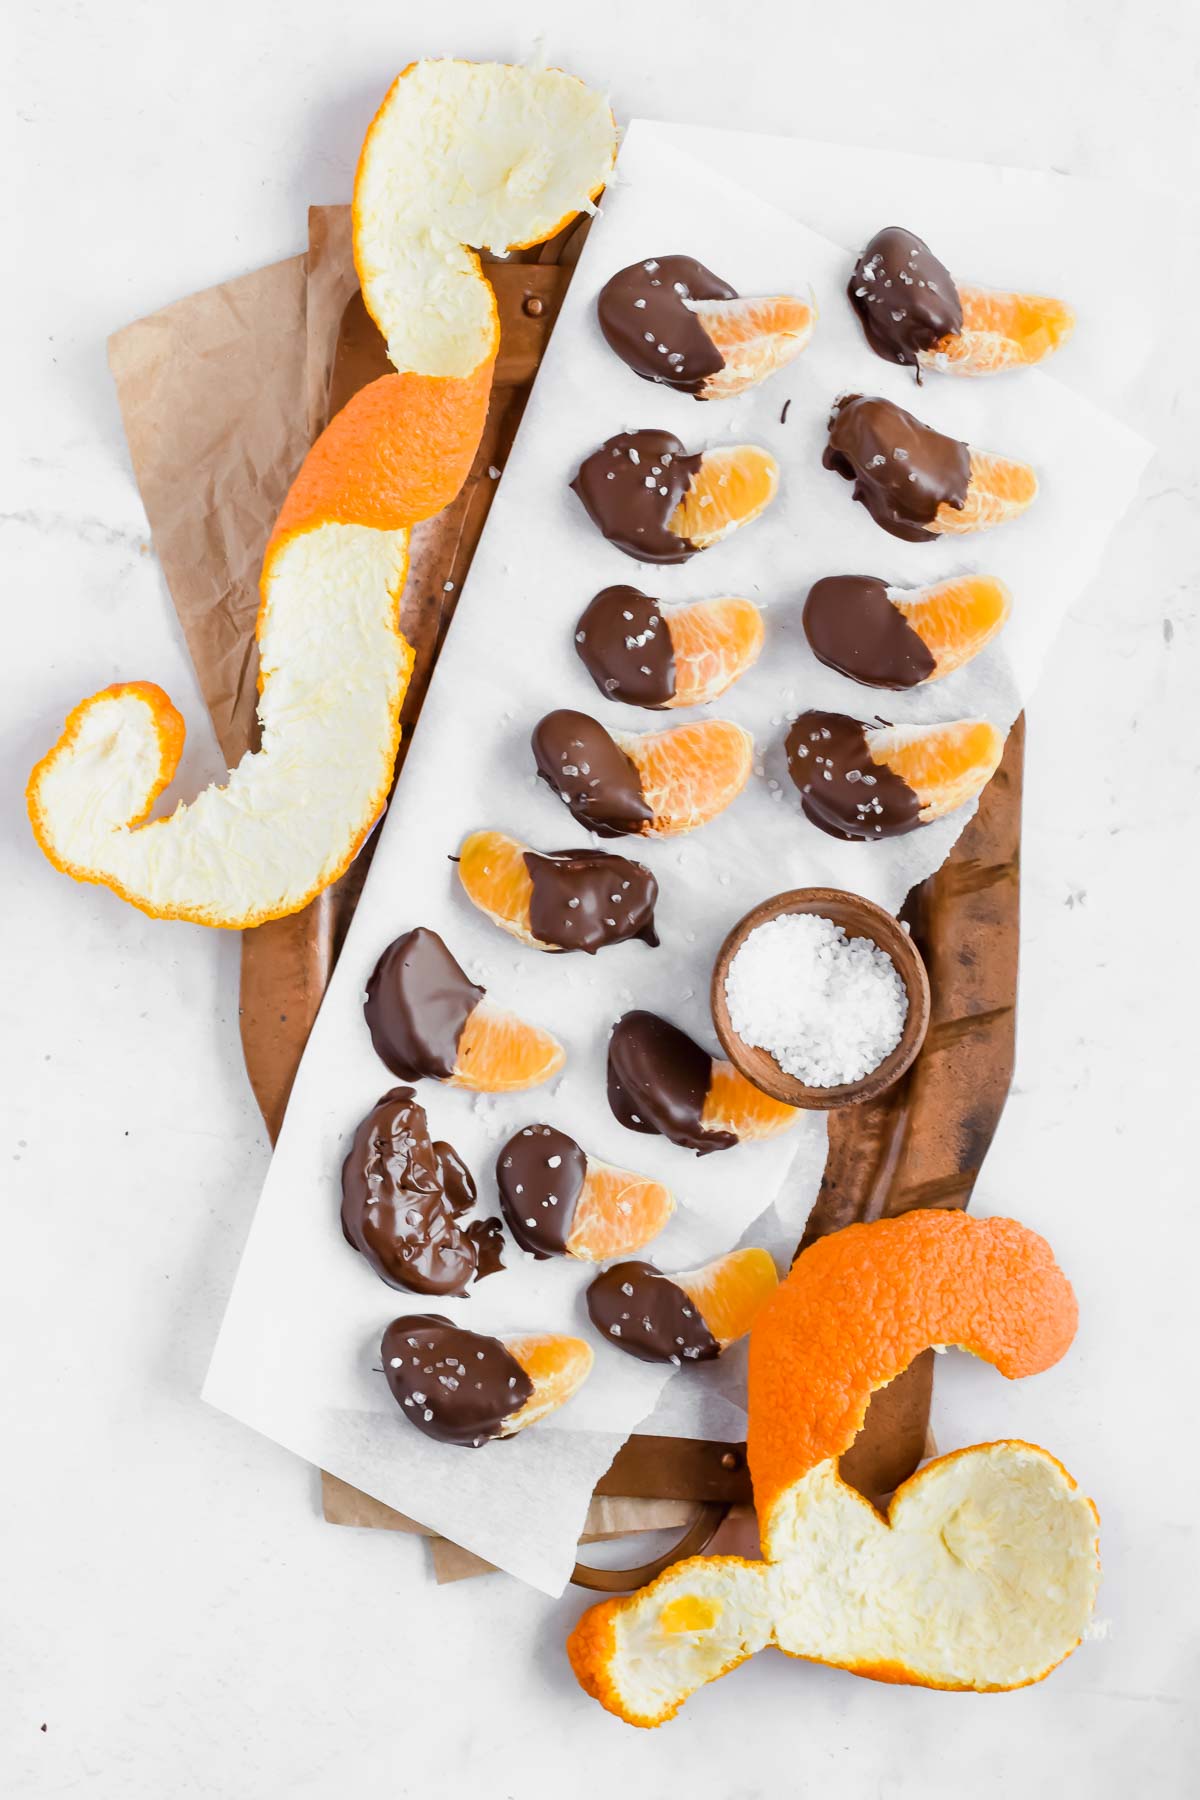 Chocolate covered oranges sprinkled with sea salt on parchment paper.